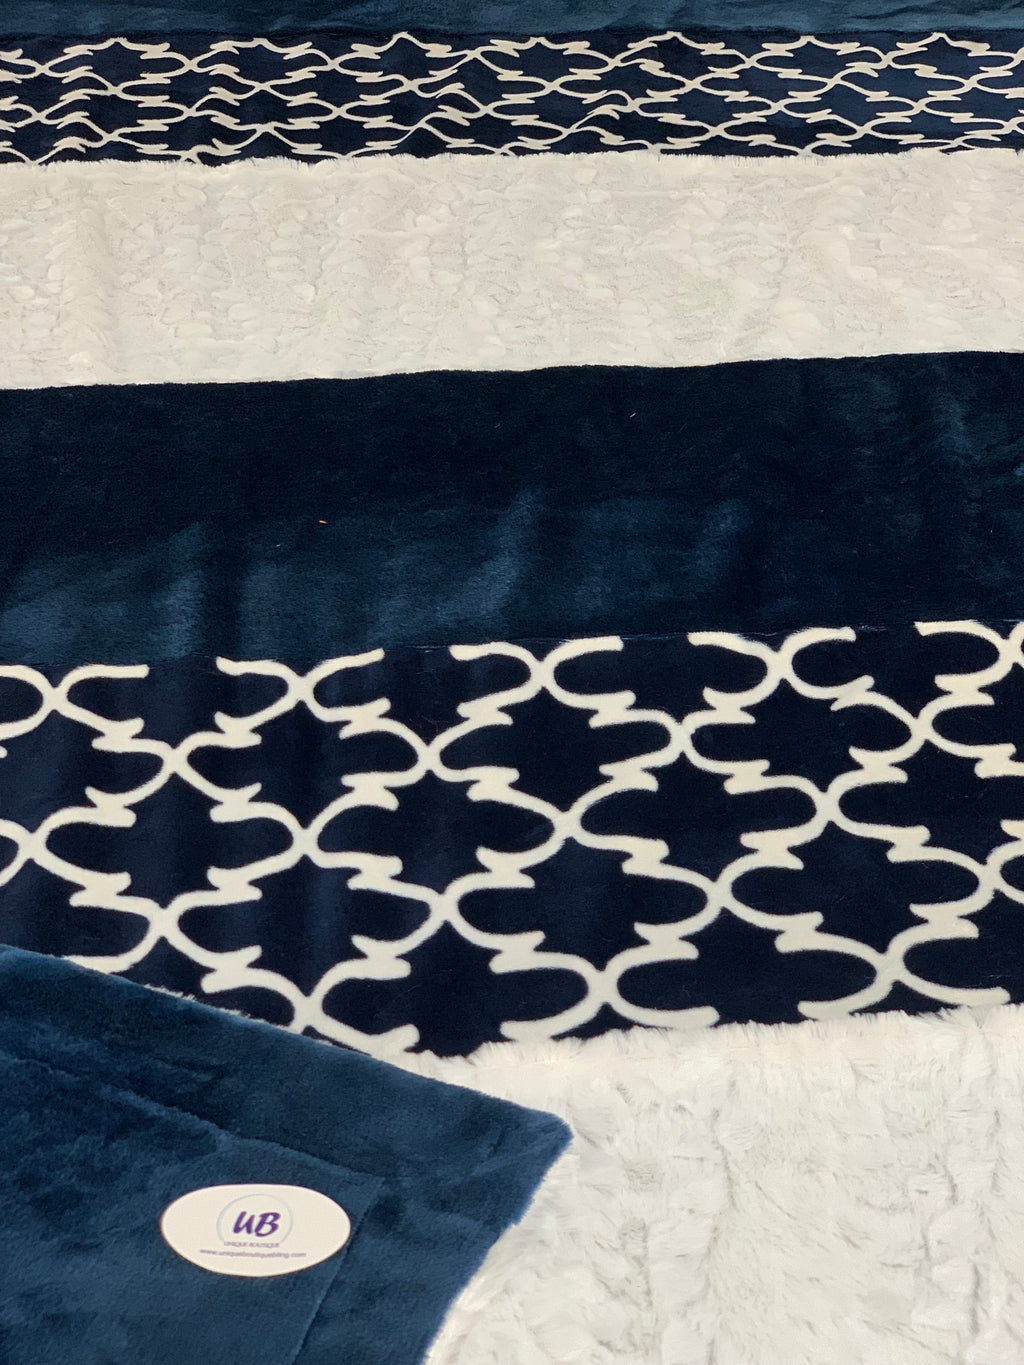 Navy & White Minky Blanket with Minky Cuddle Backing